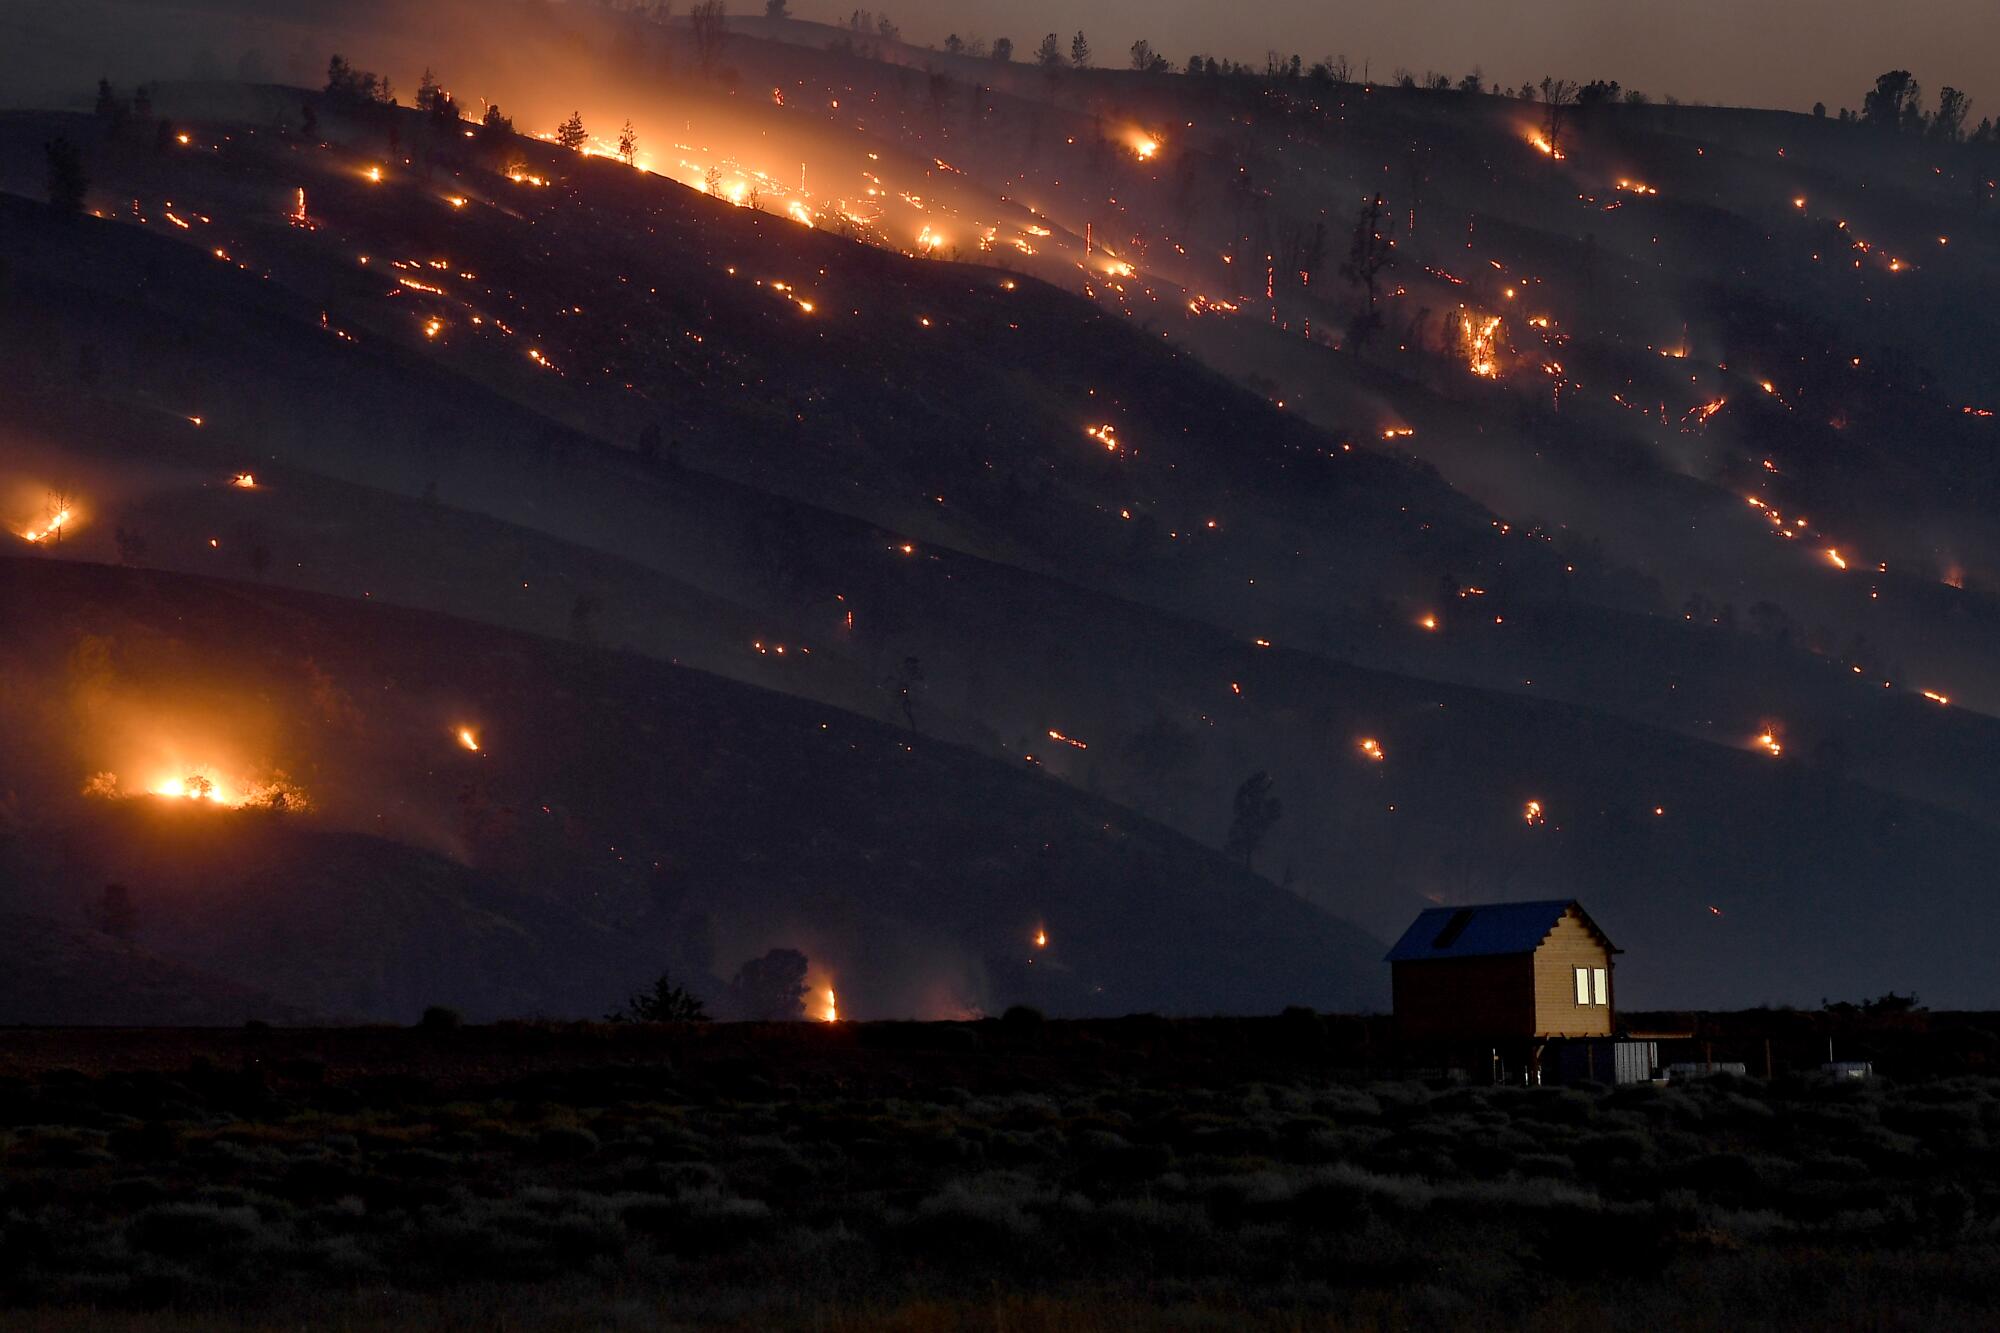 A charred hillside with patches of glowing orange at night.